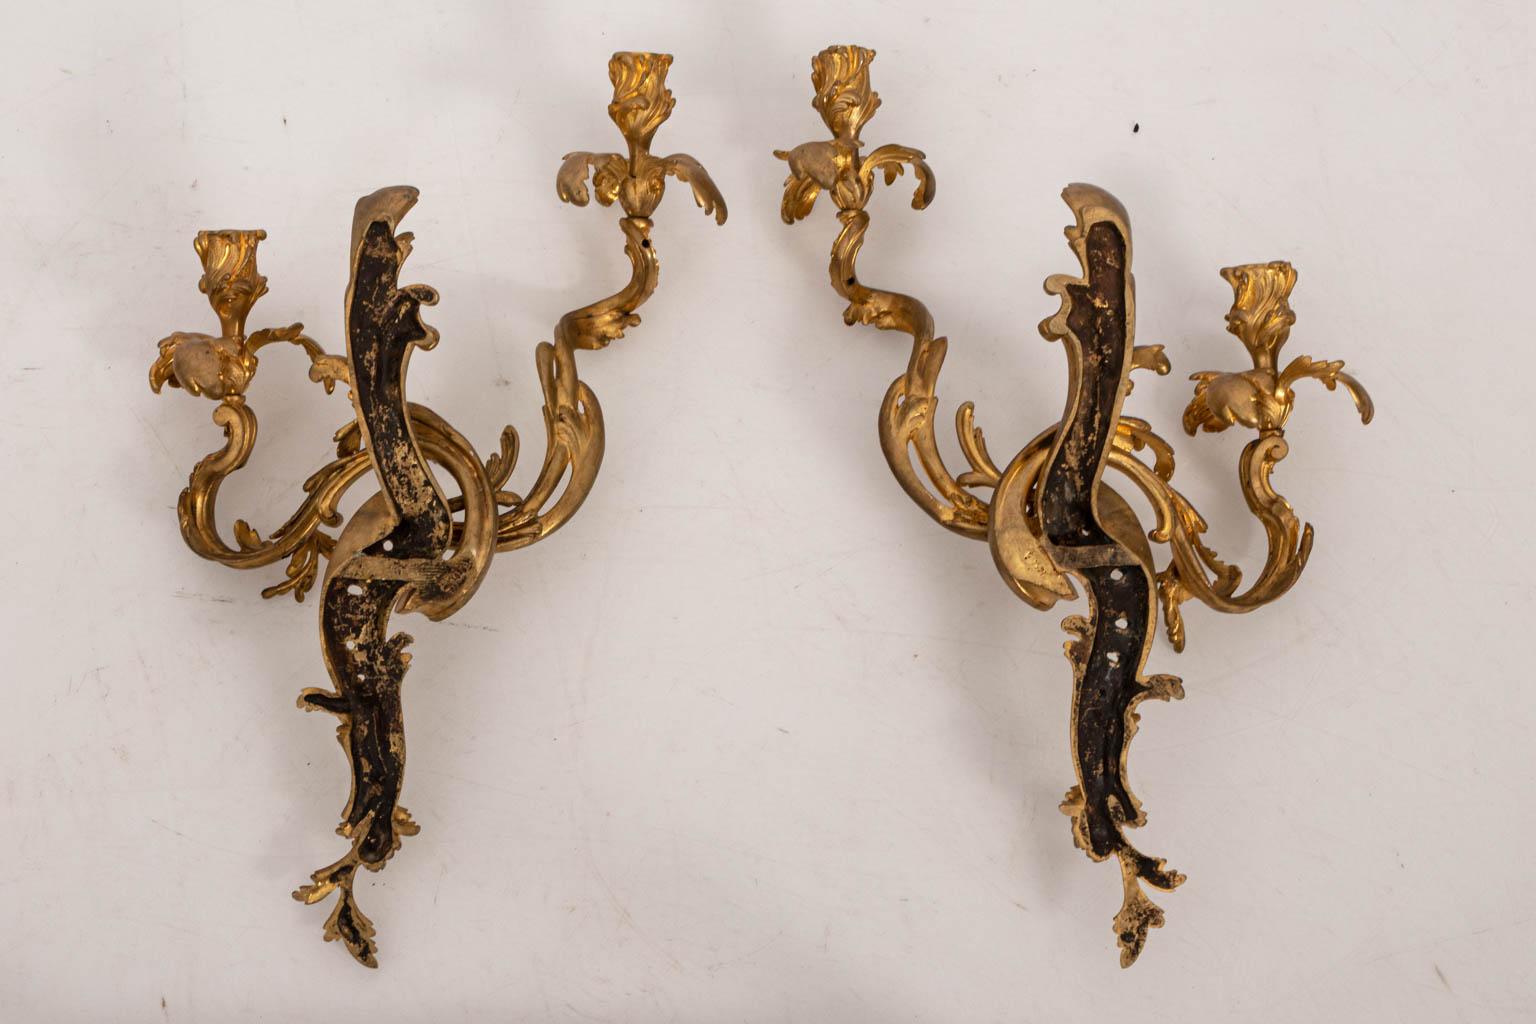 Pair of French two light sconces with foliage detail, circa 1930s. Please note of wear consistent with age. Shades not included. Made in France.